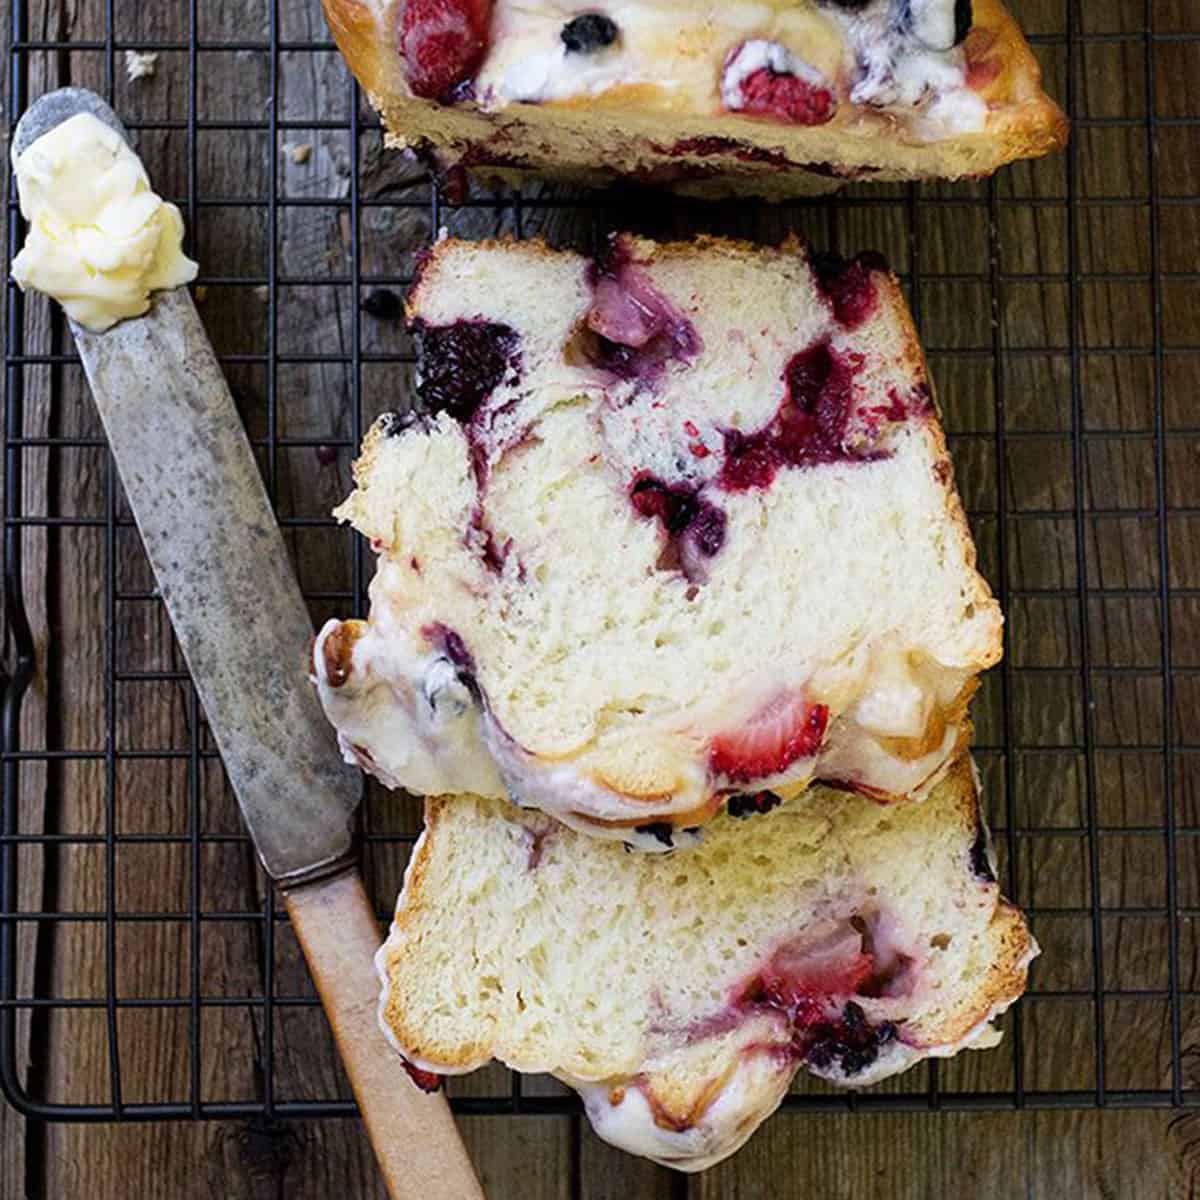 Candied Fruit Loaf Cake - Our recipe with photos - Meilleur du Chef